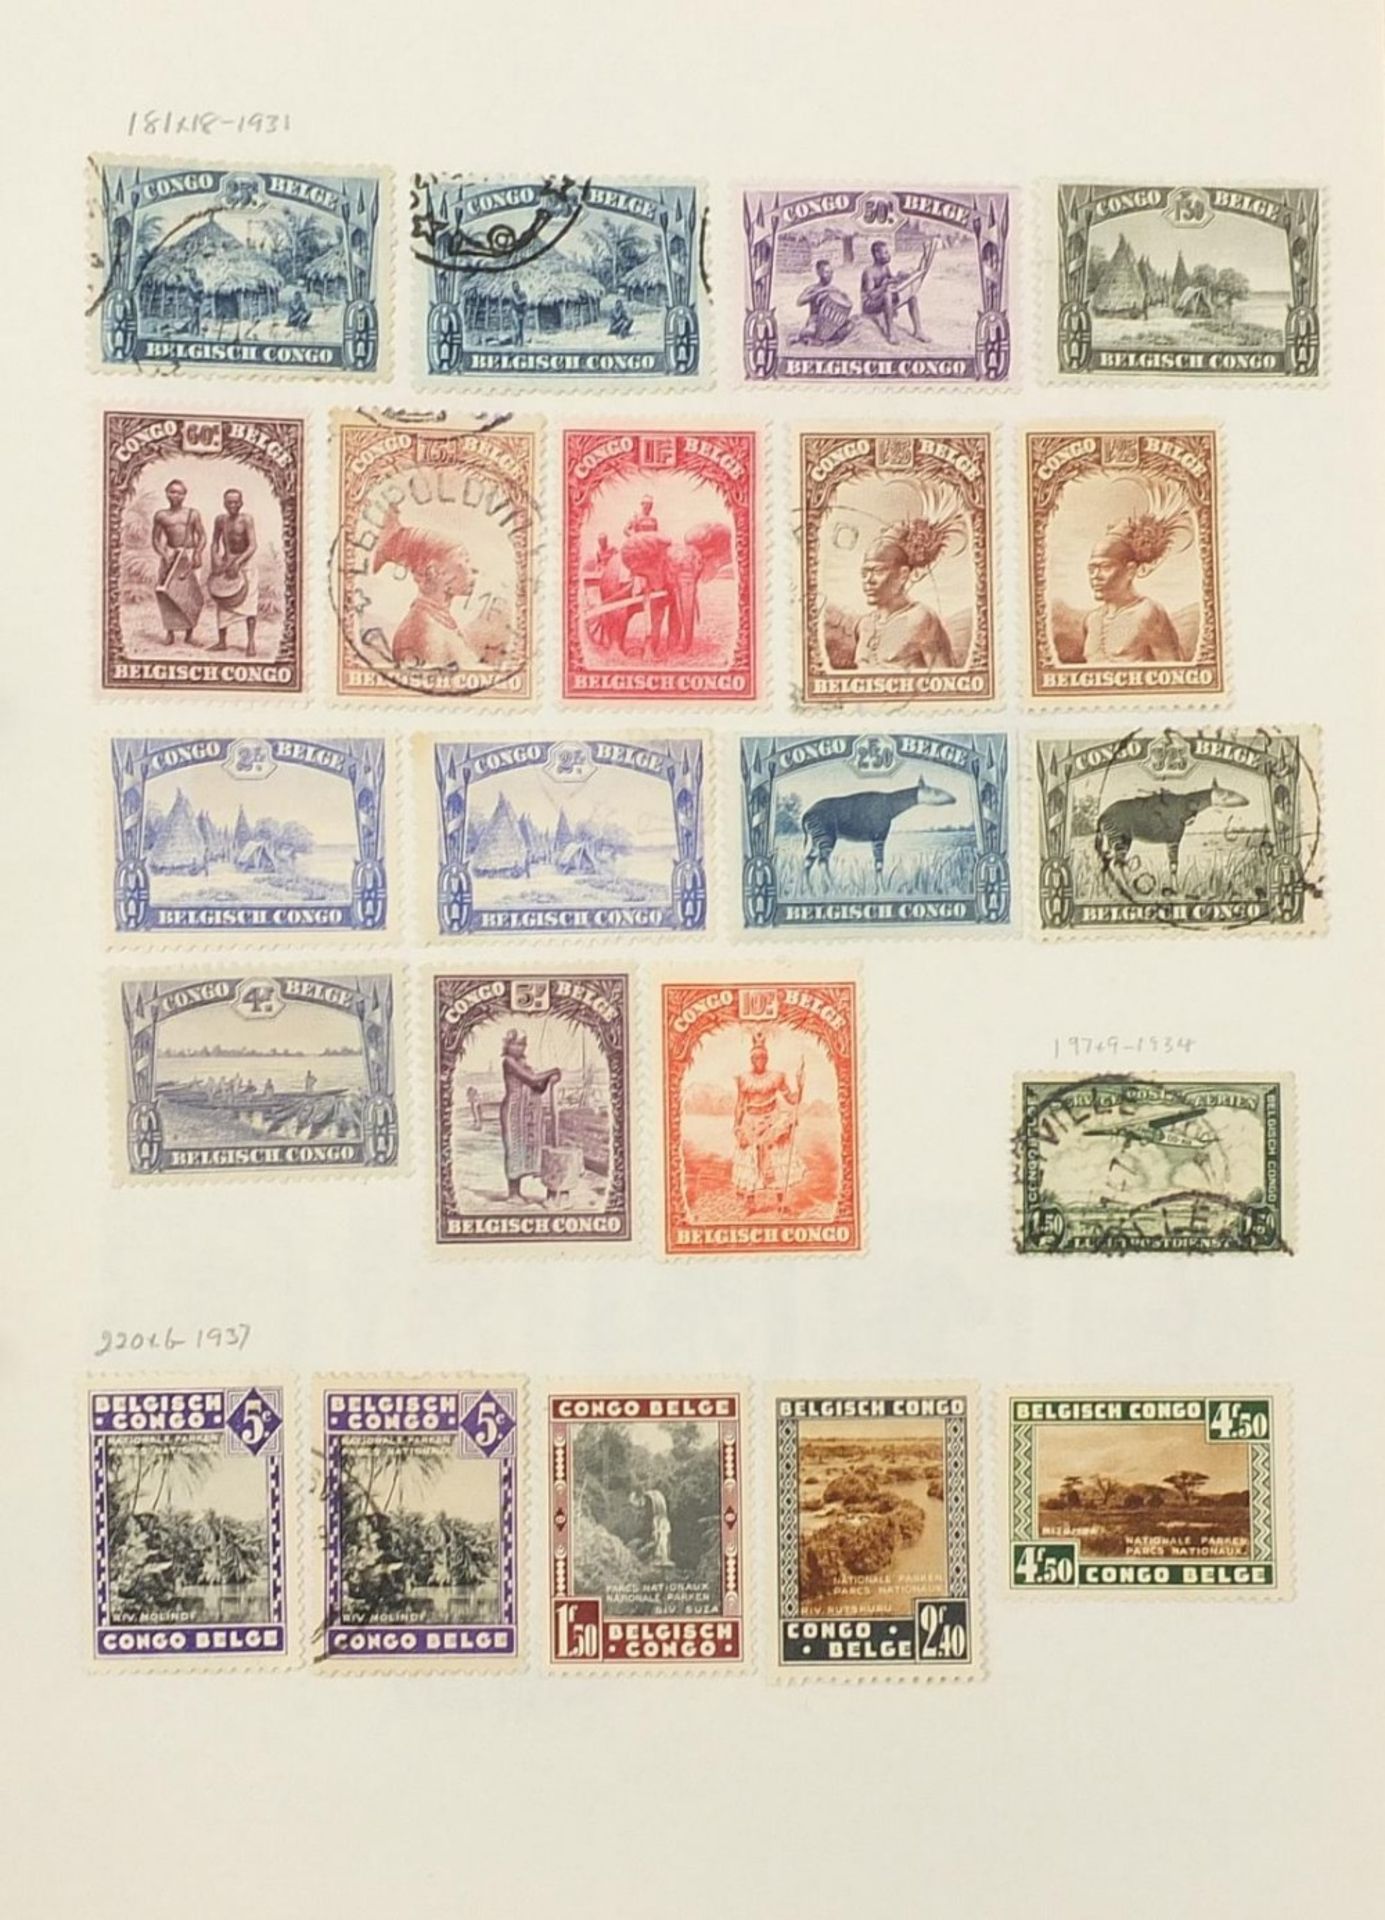 Extensive collection of antique and later world stamps arranged in albums including Brazil, - Image 45 of 52